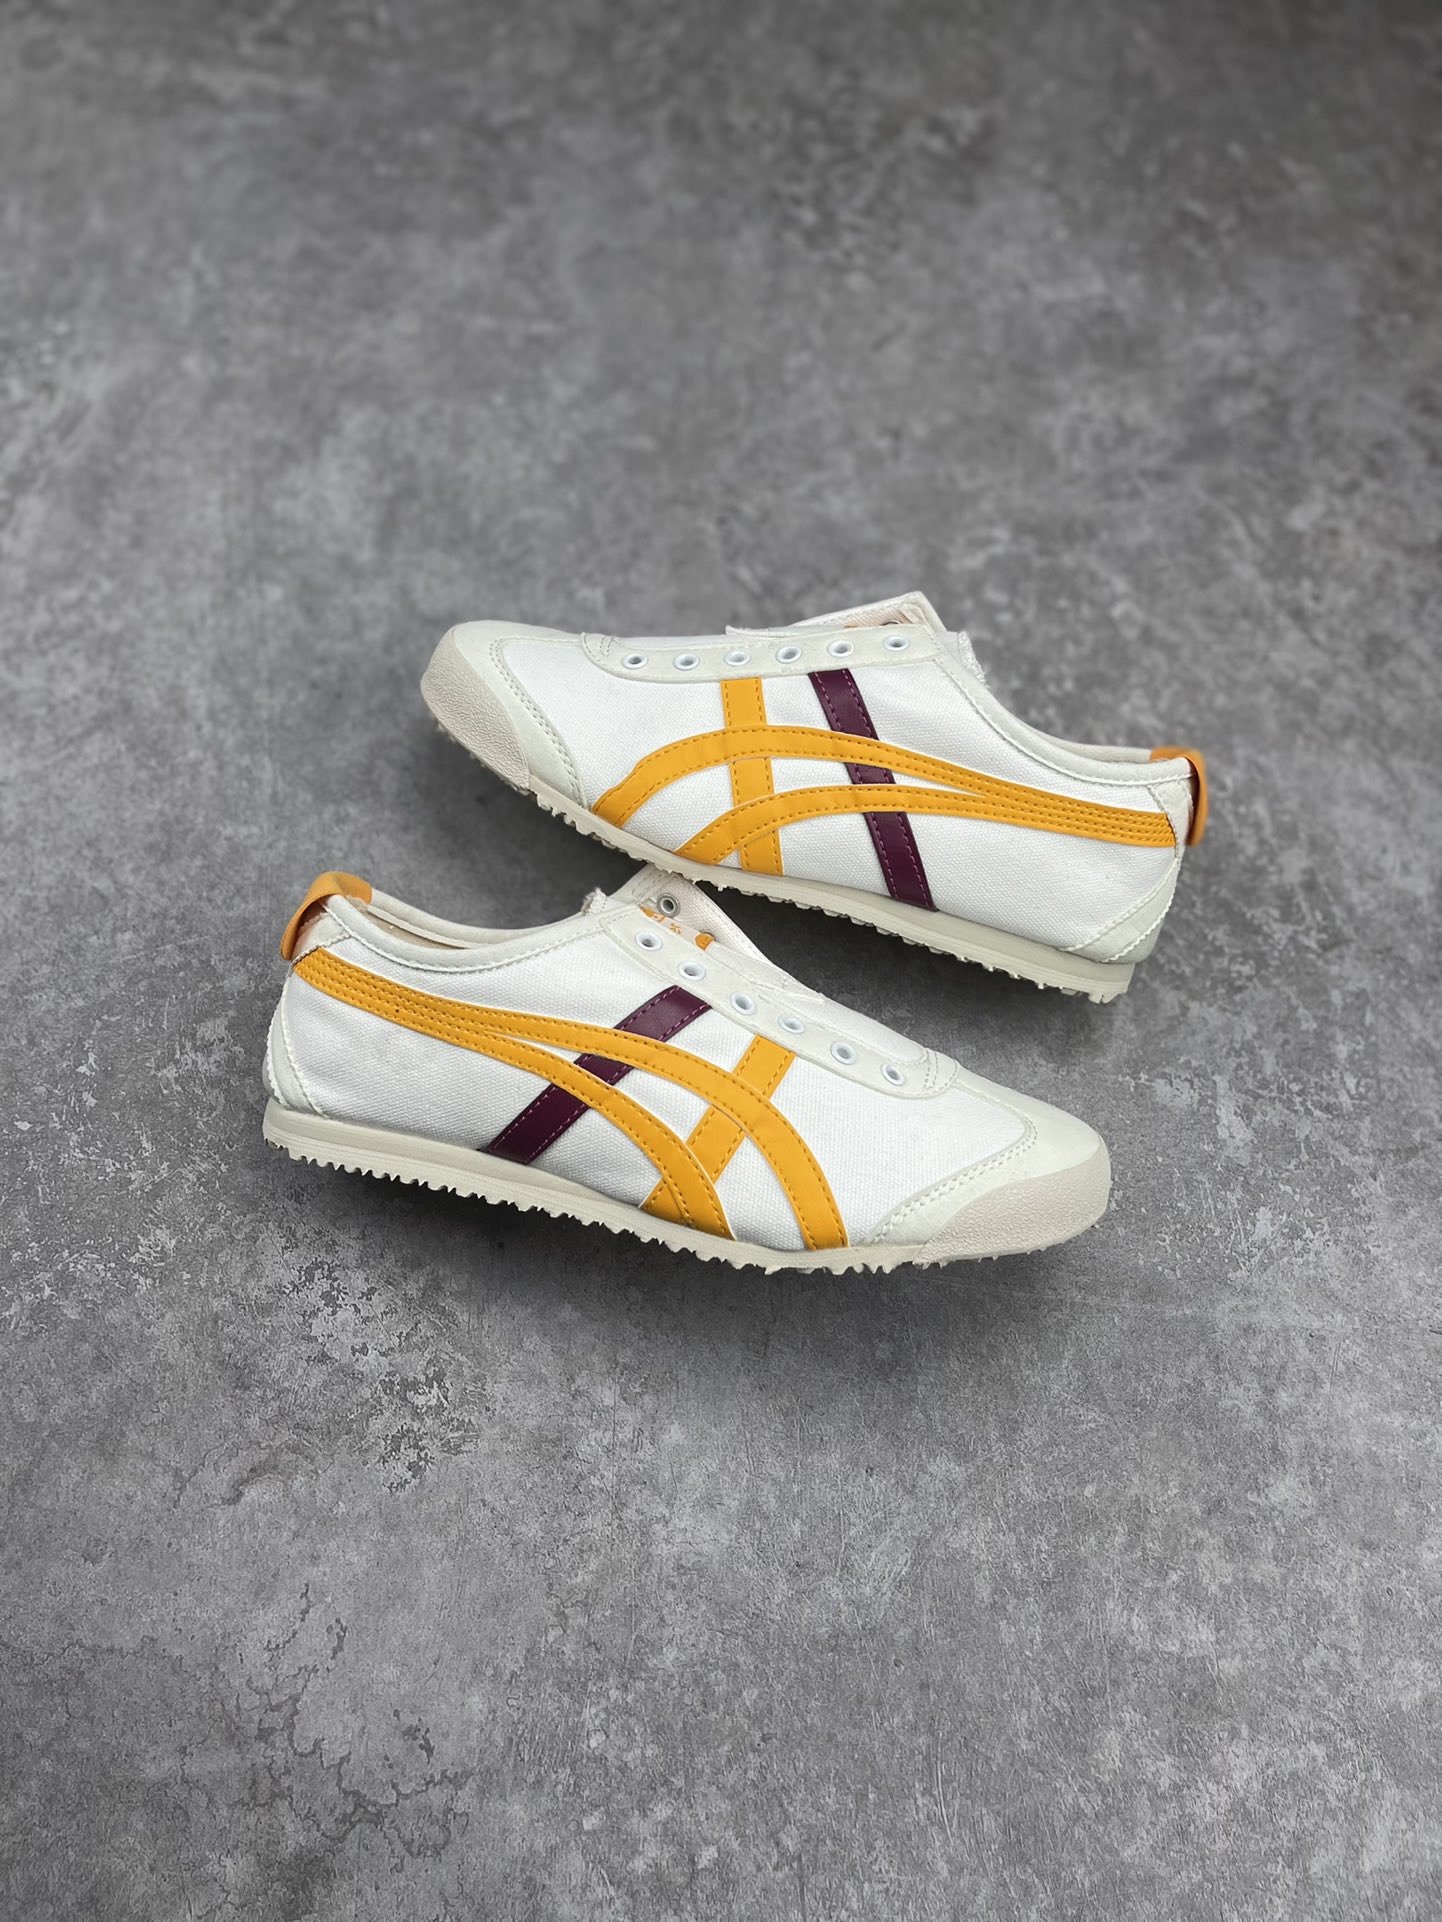 You Are Searching Asics Supplier On clothesyupoo.com | Yupoo